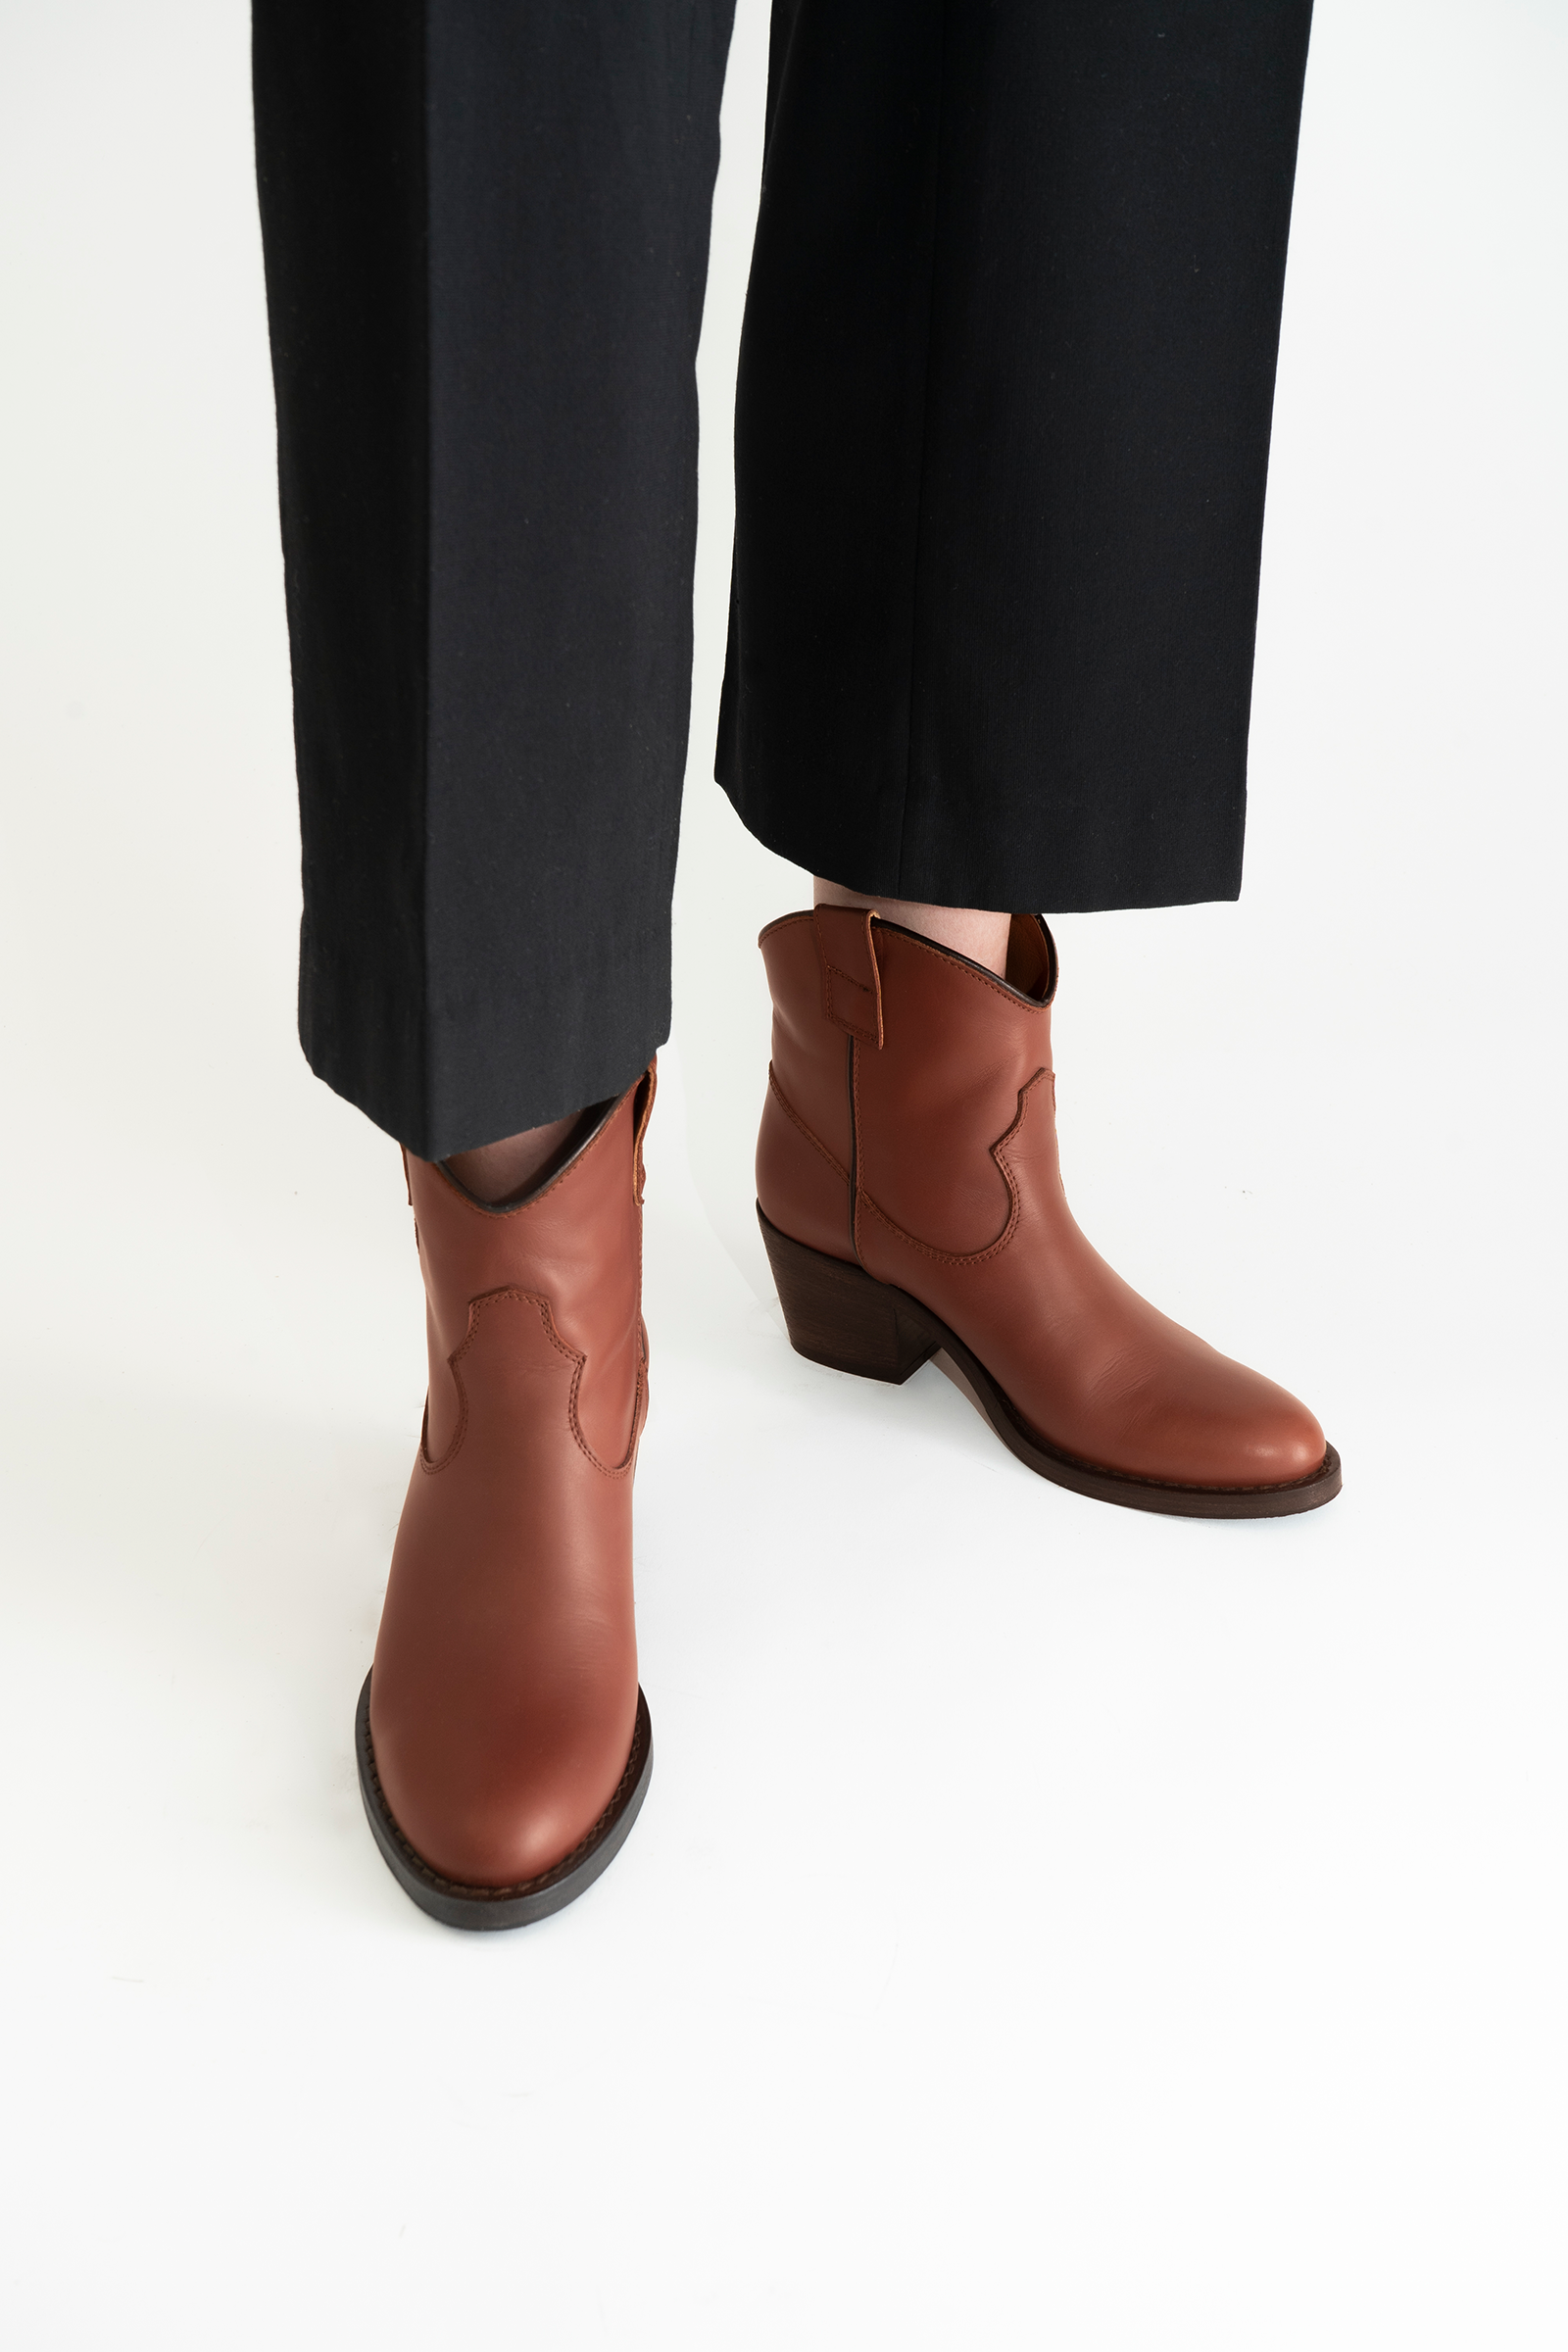 Anna boots, brown leather